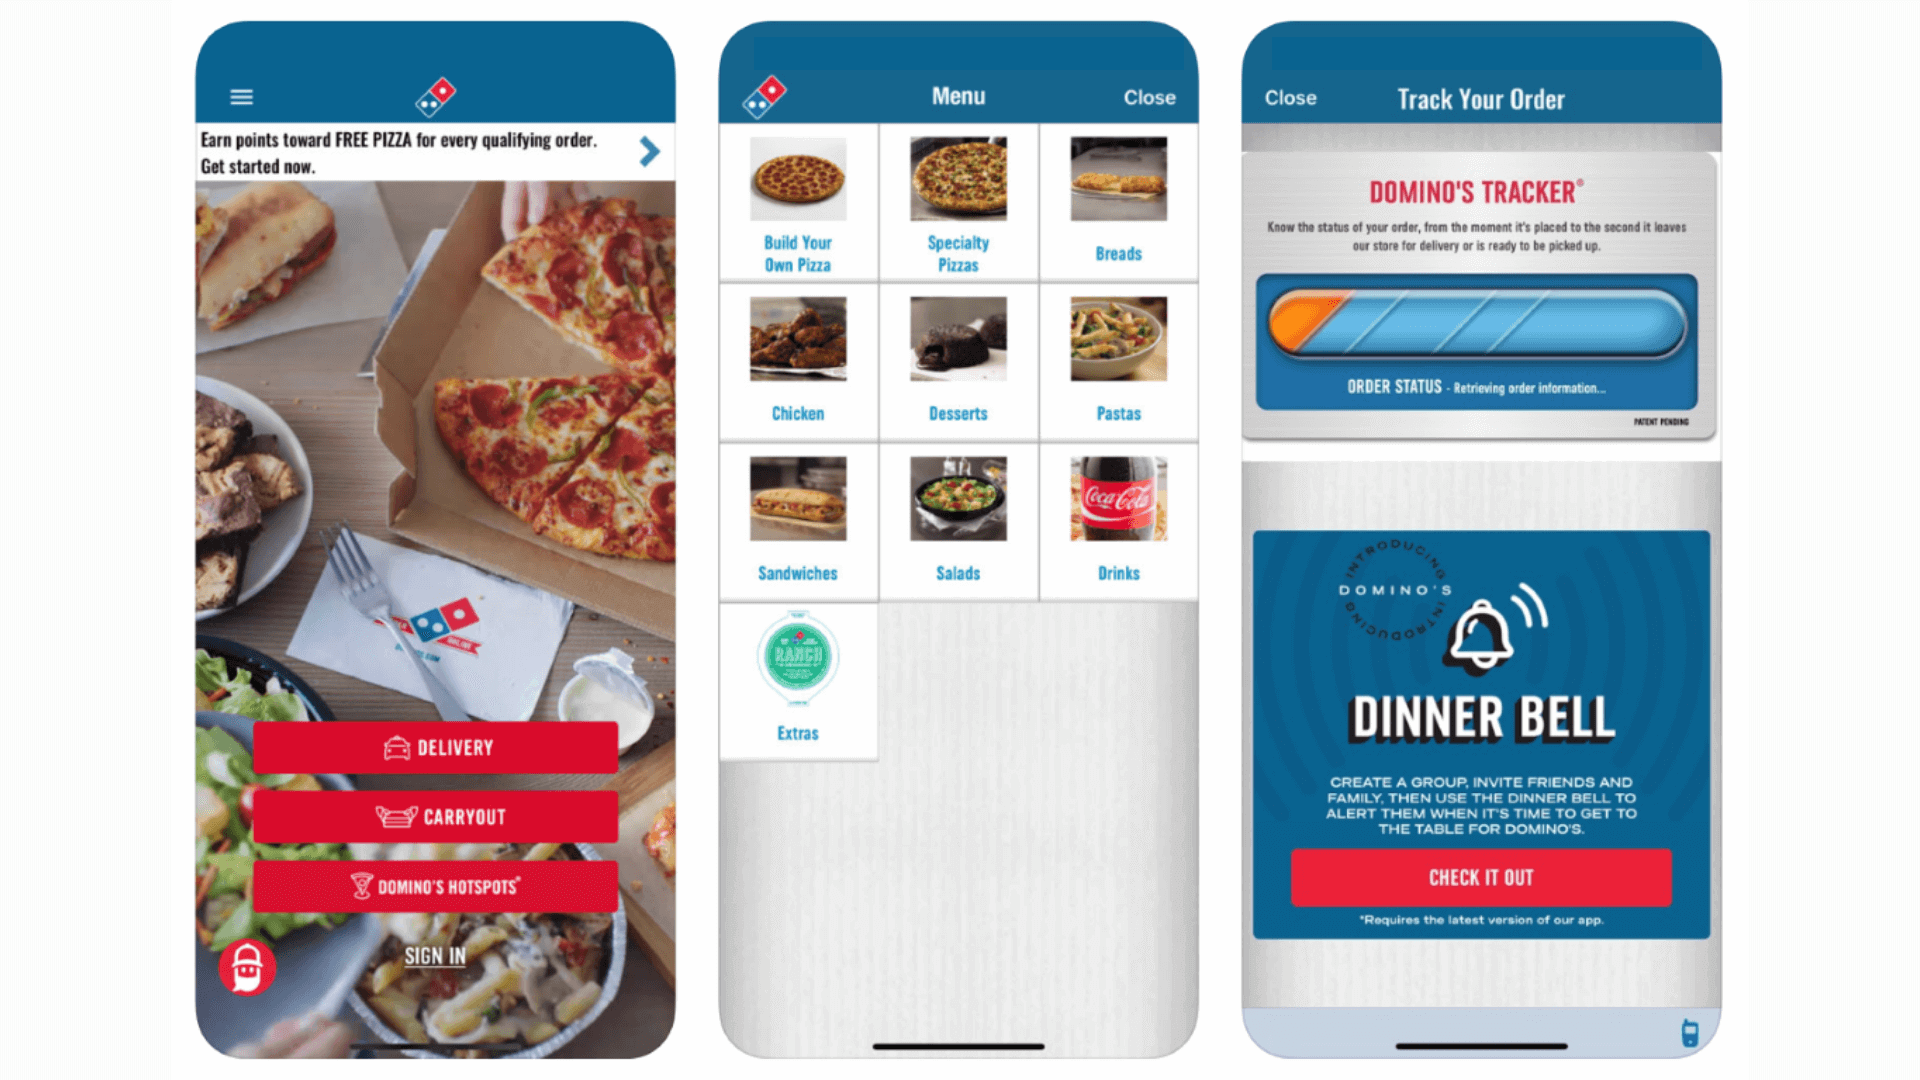 How Much Does It Cost to Build a Restaurant App Like OpenTable or Zomato? -  Mind Studios